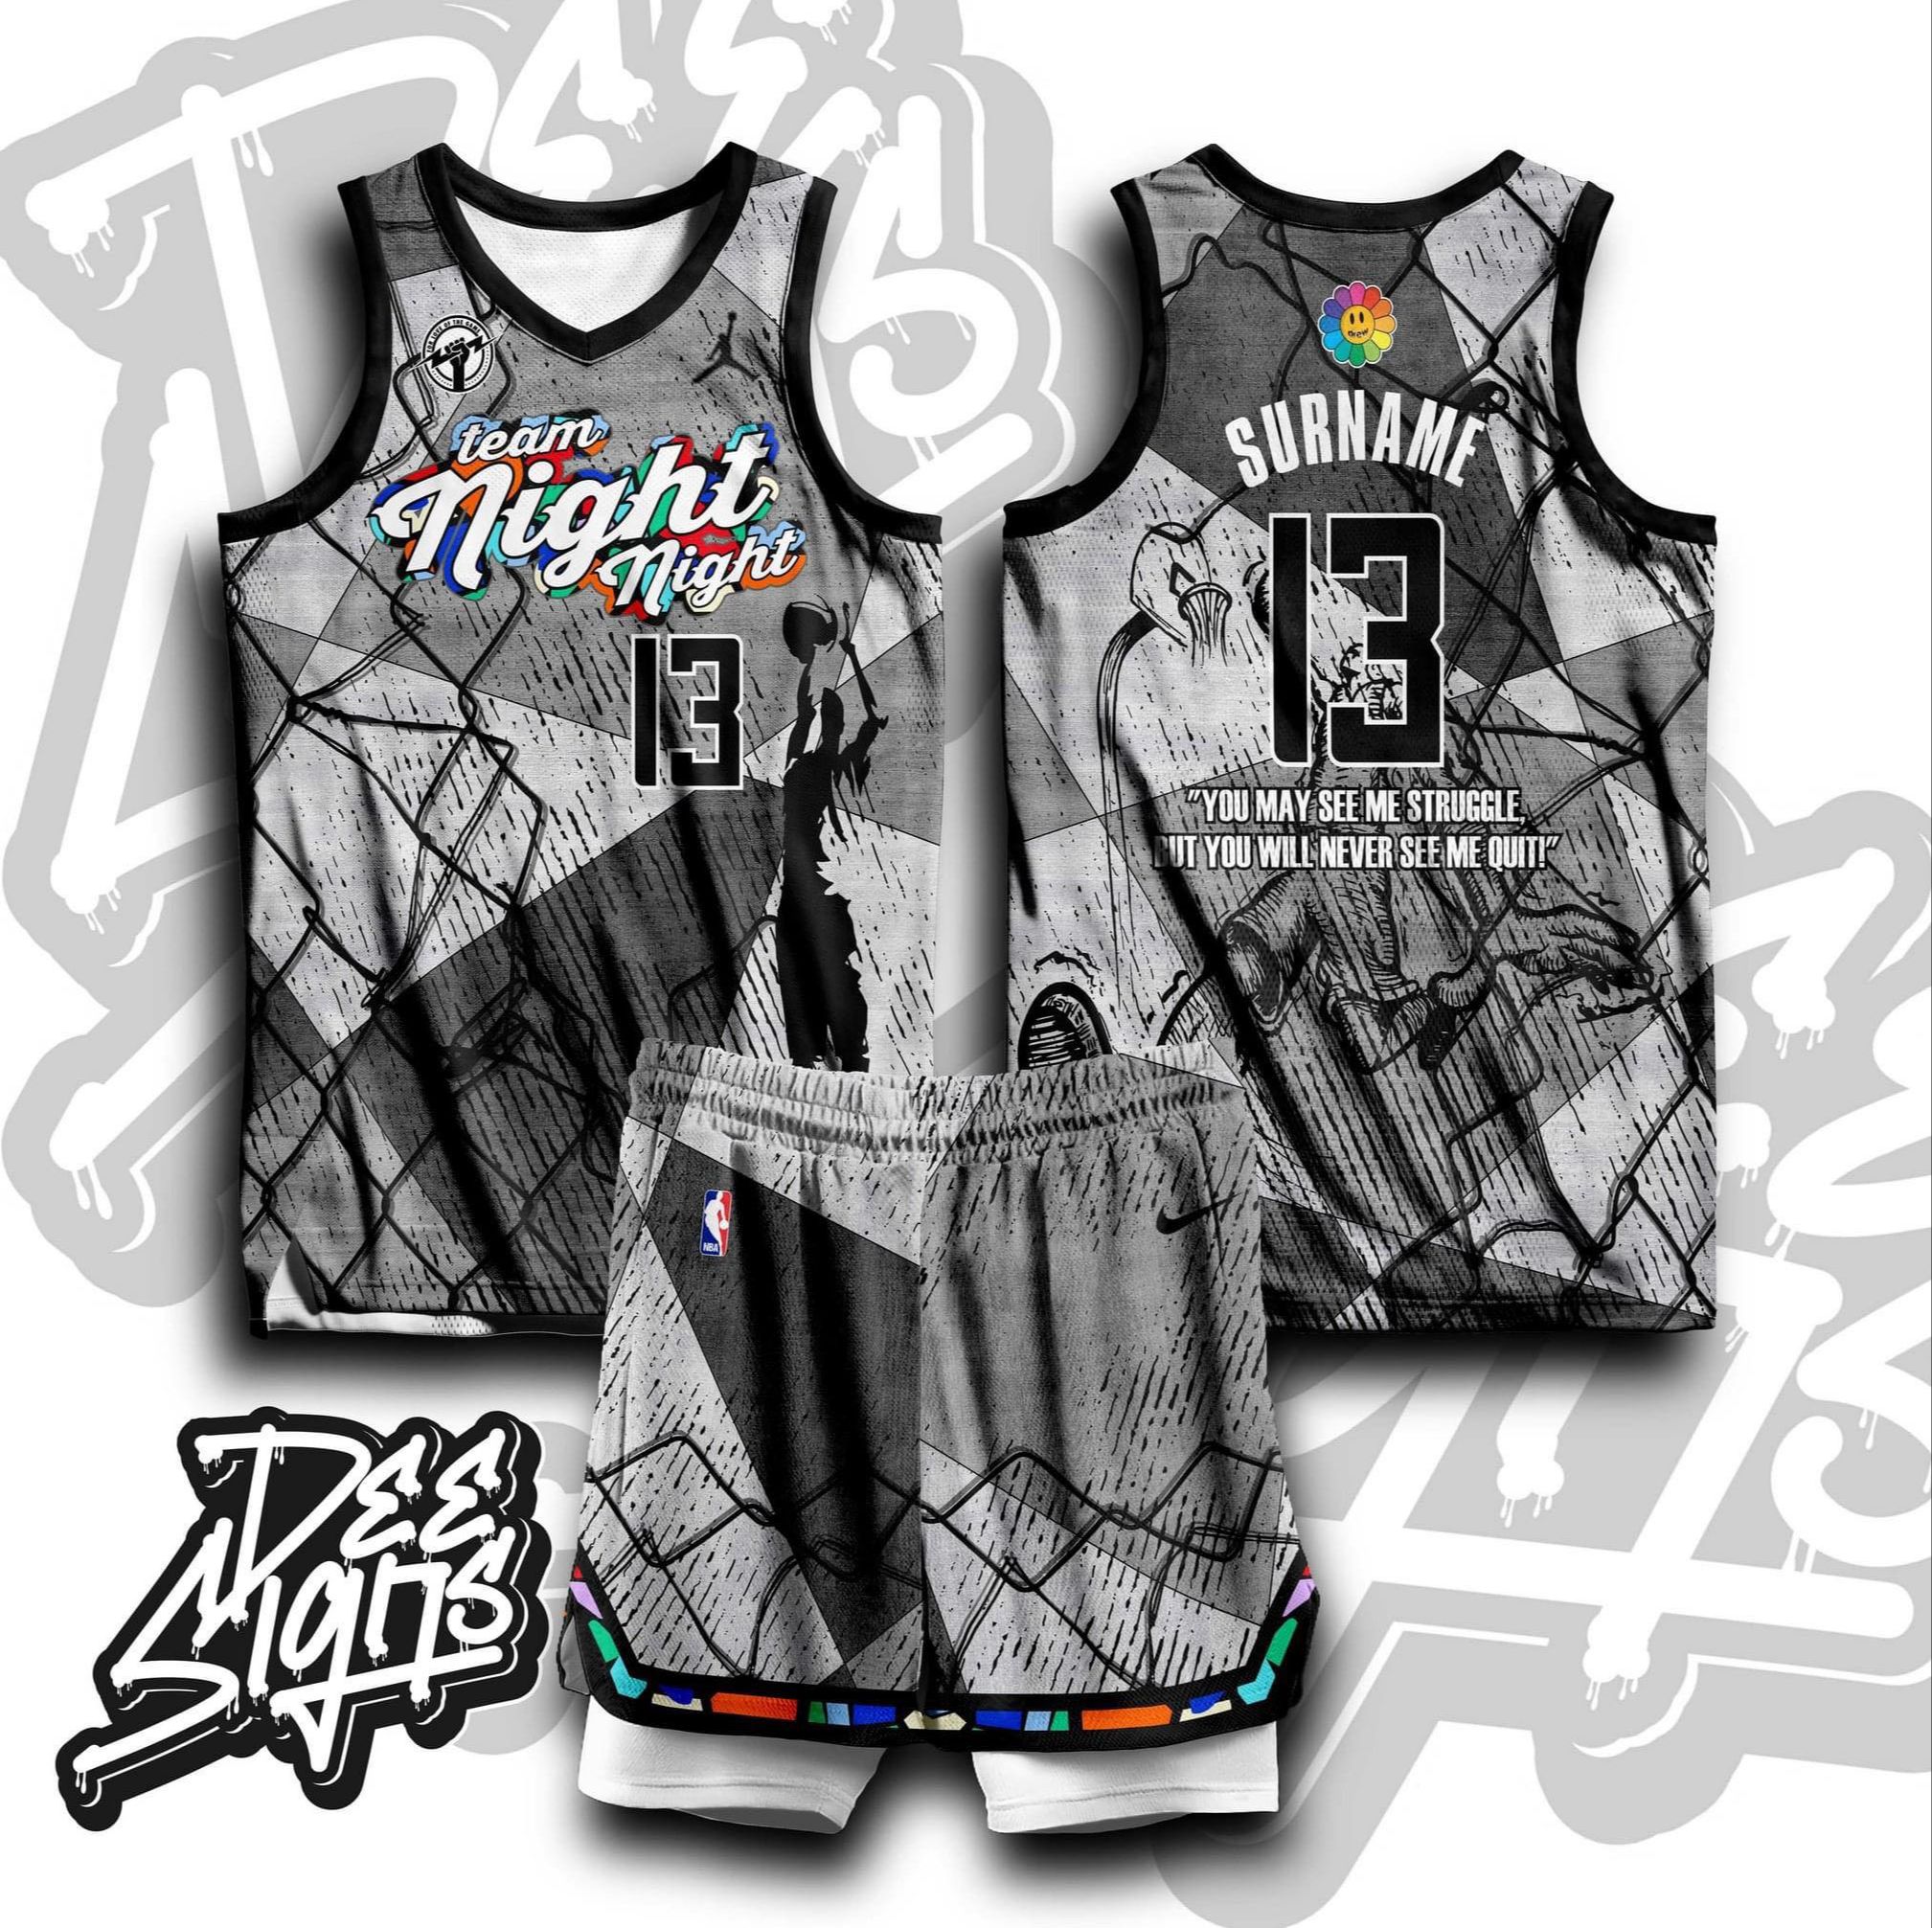 This full sublimated jersey design - JAPA Global Trading